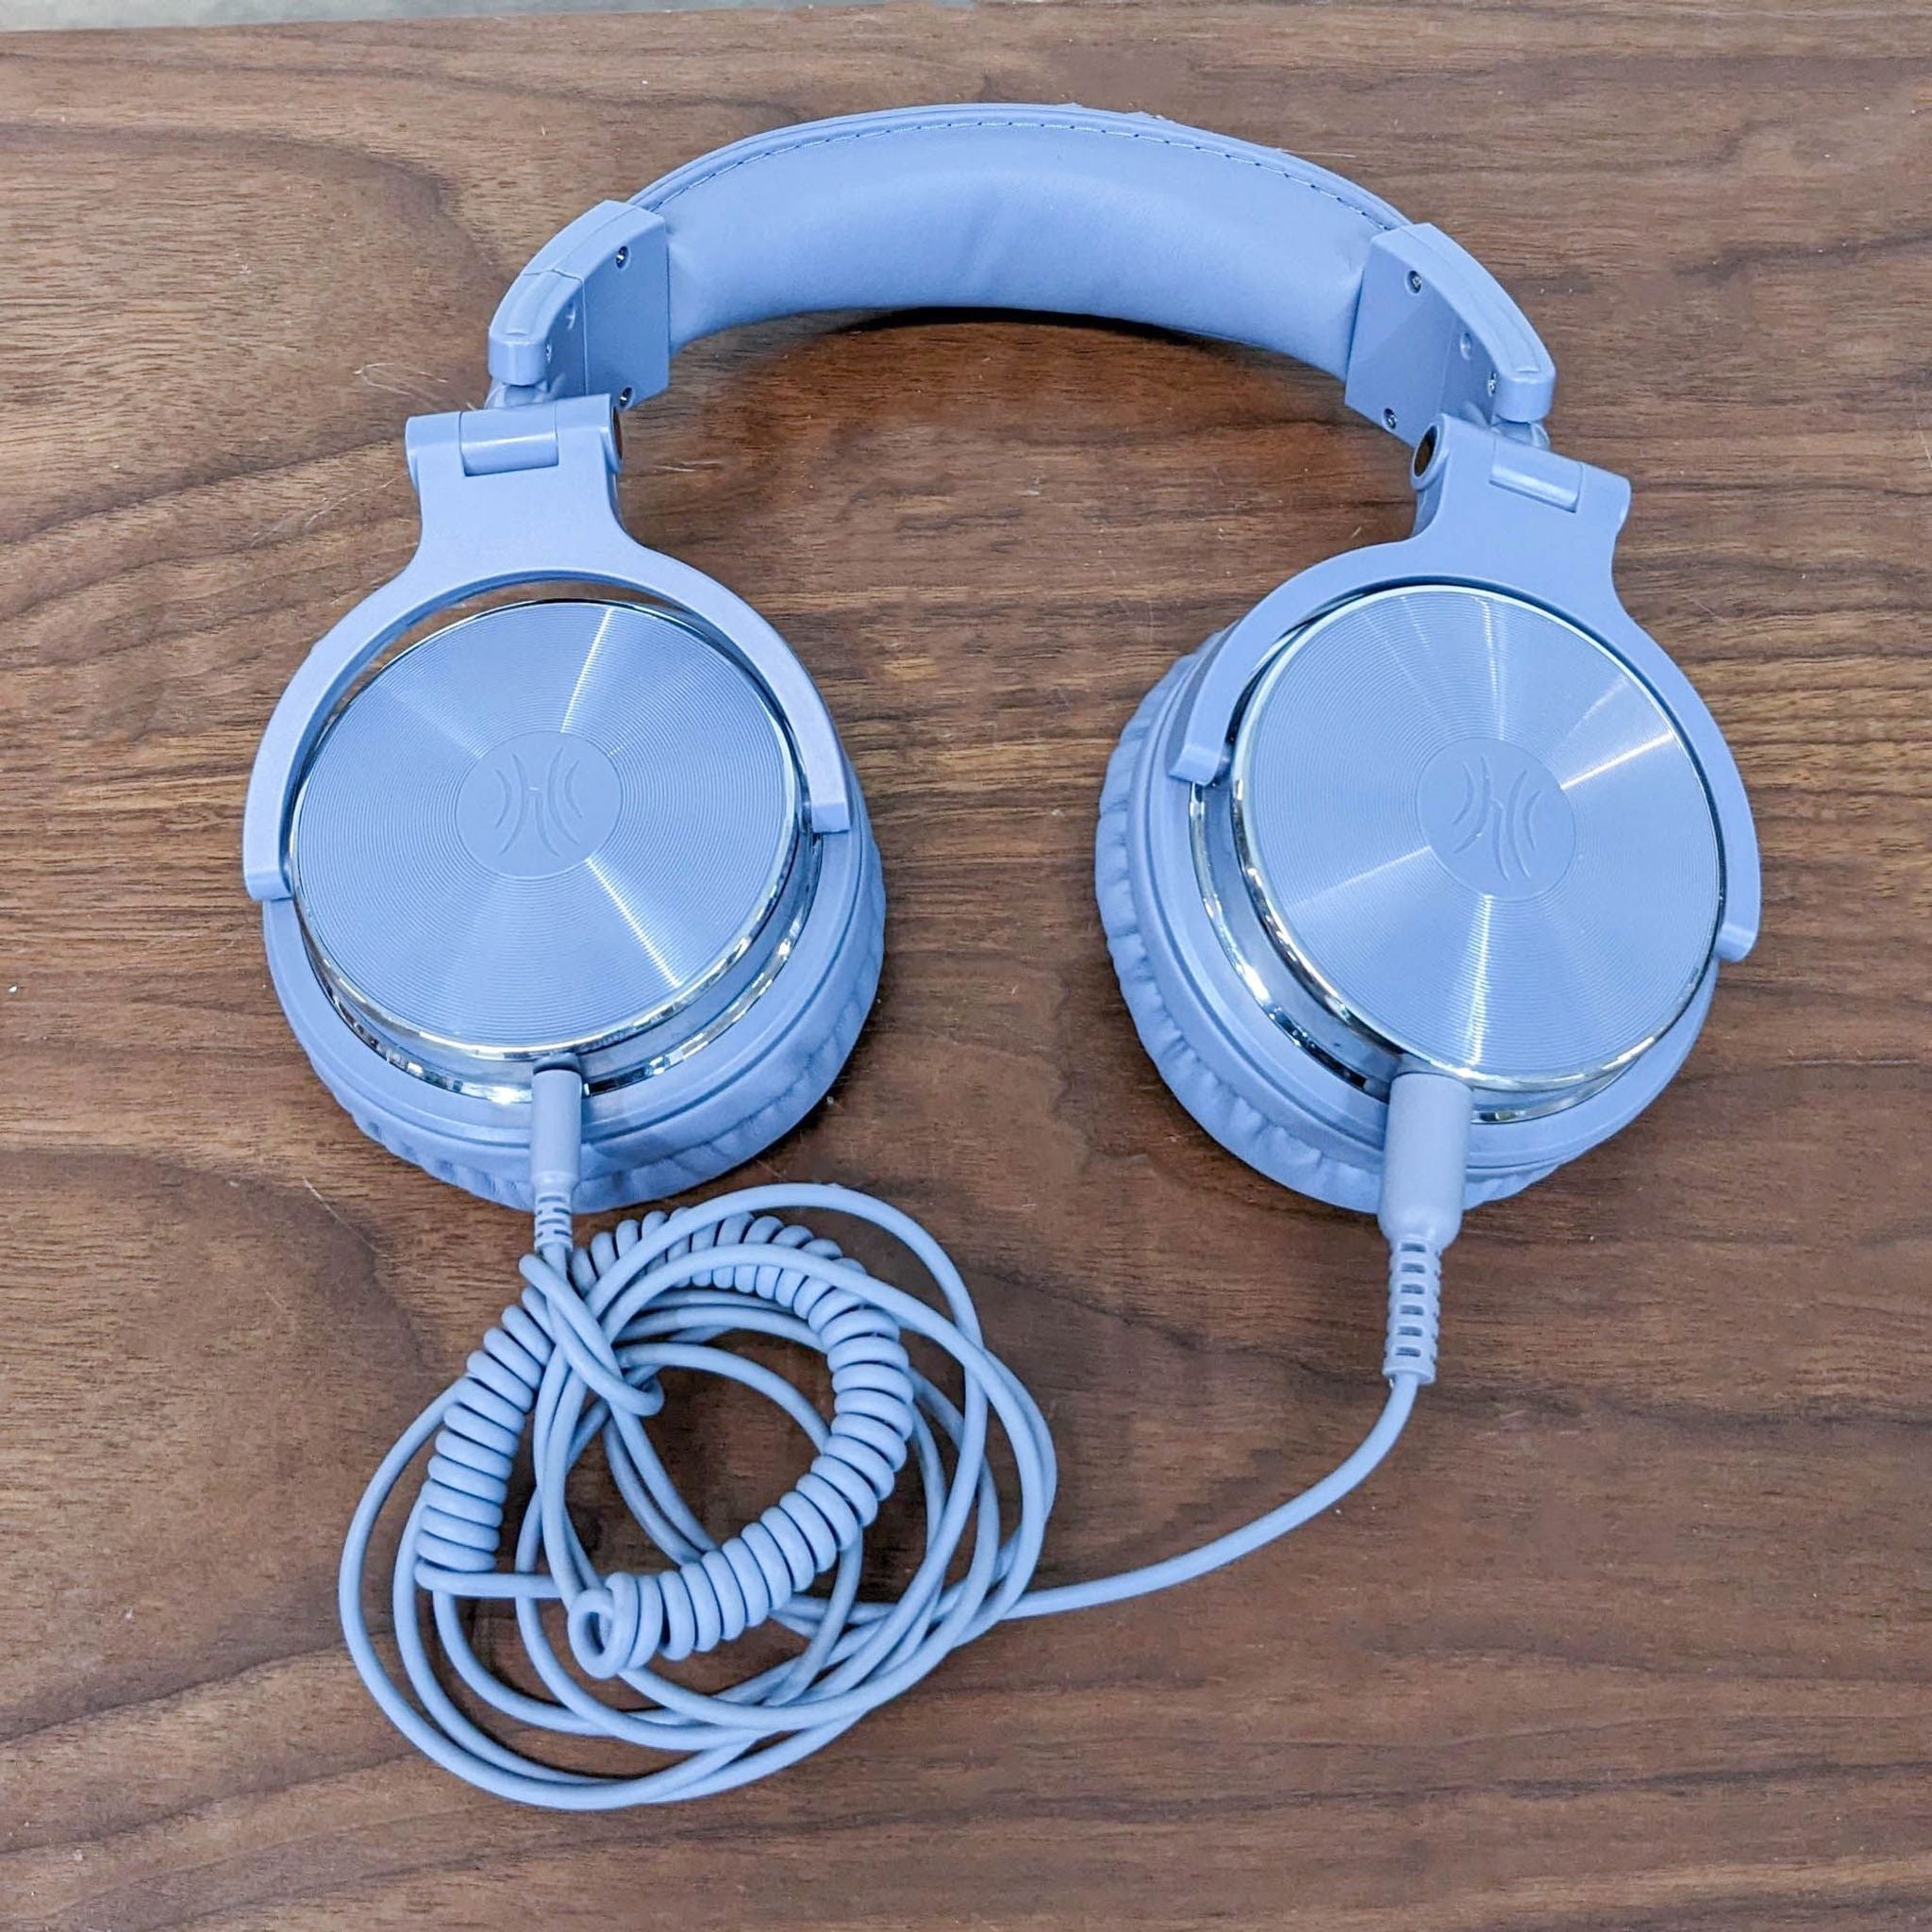 Top view of OneOdio closed-back headphones with L/R indicators inside earpads, coiled cord attached.